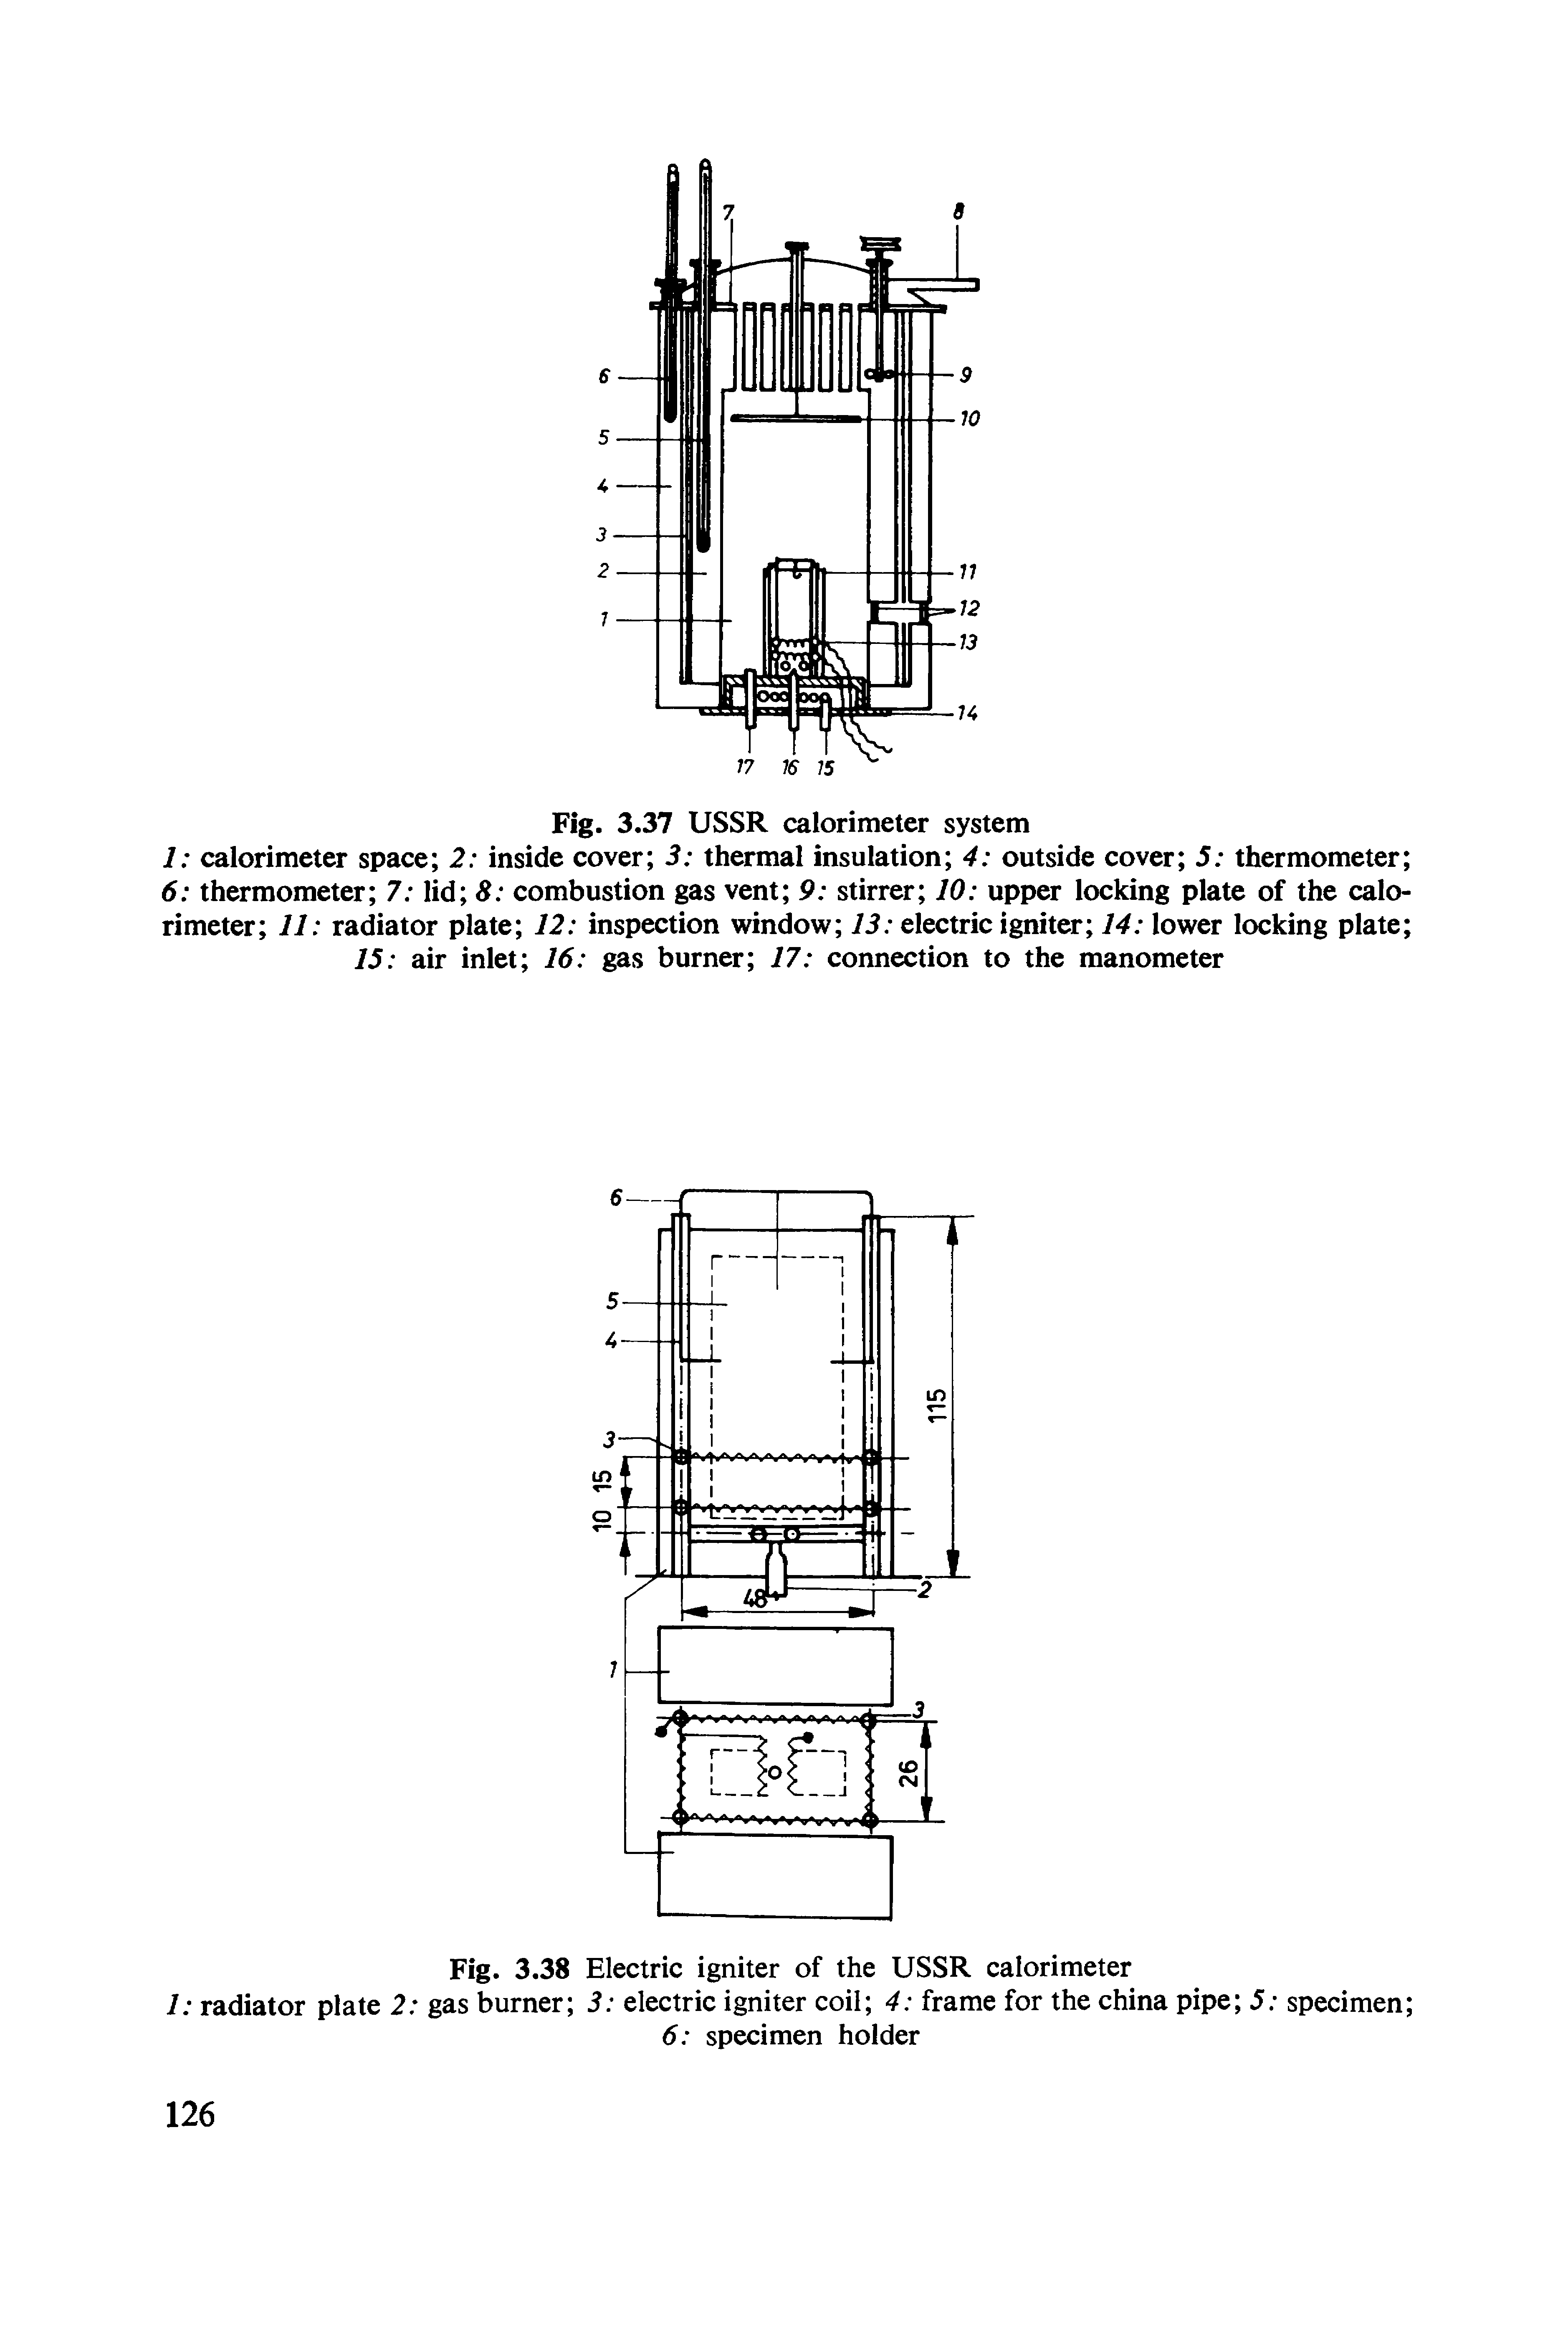 Fig. 3.38 Electric igniter of the USSR calorimeter 1 radiator plate 2 gas burner 3 electric igniter coil 4 frame for the china pipe 5 specimen ...